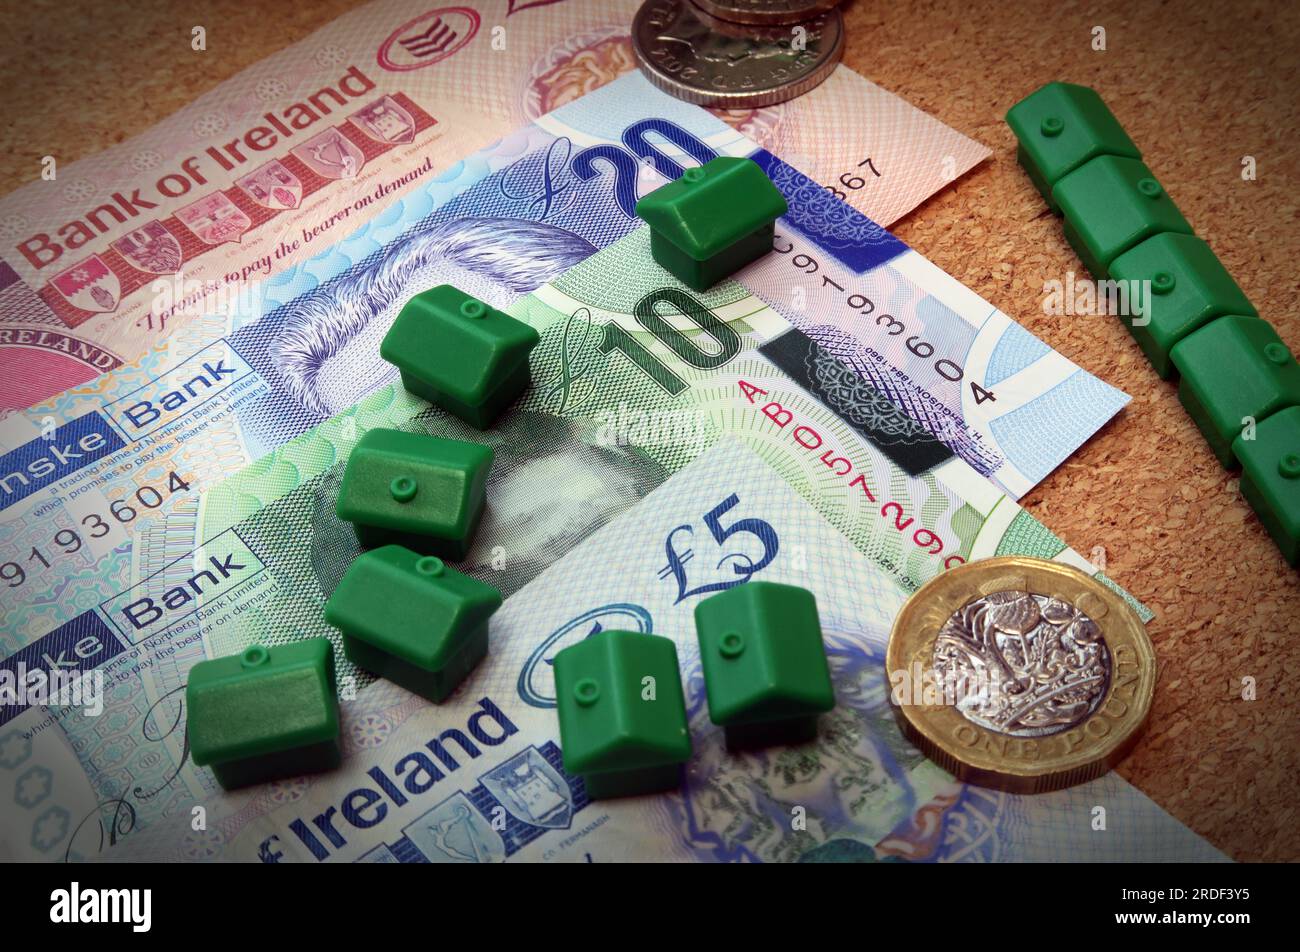 Accommodation costs ( buy or rent) in Northern Ireland, Sterling notes, coins, Monopoly houses Stock Photo